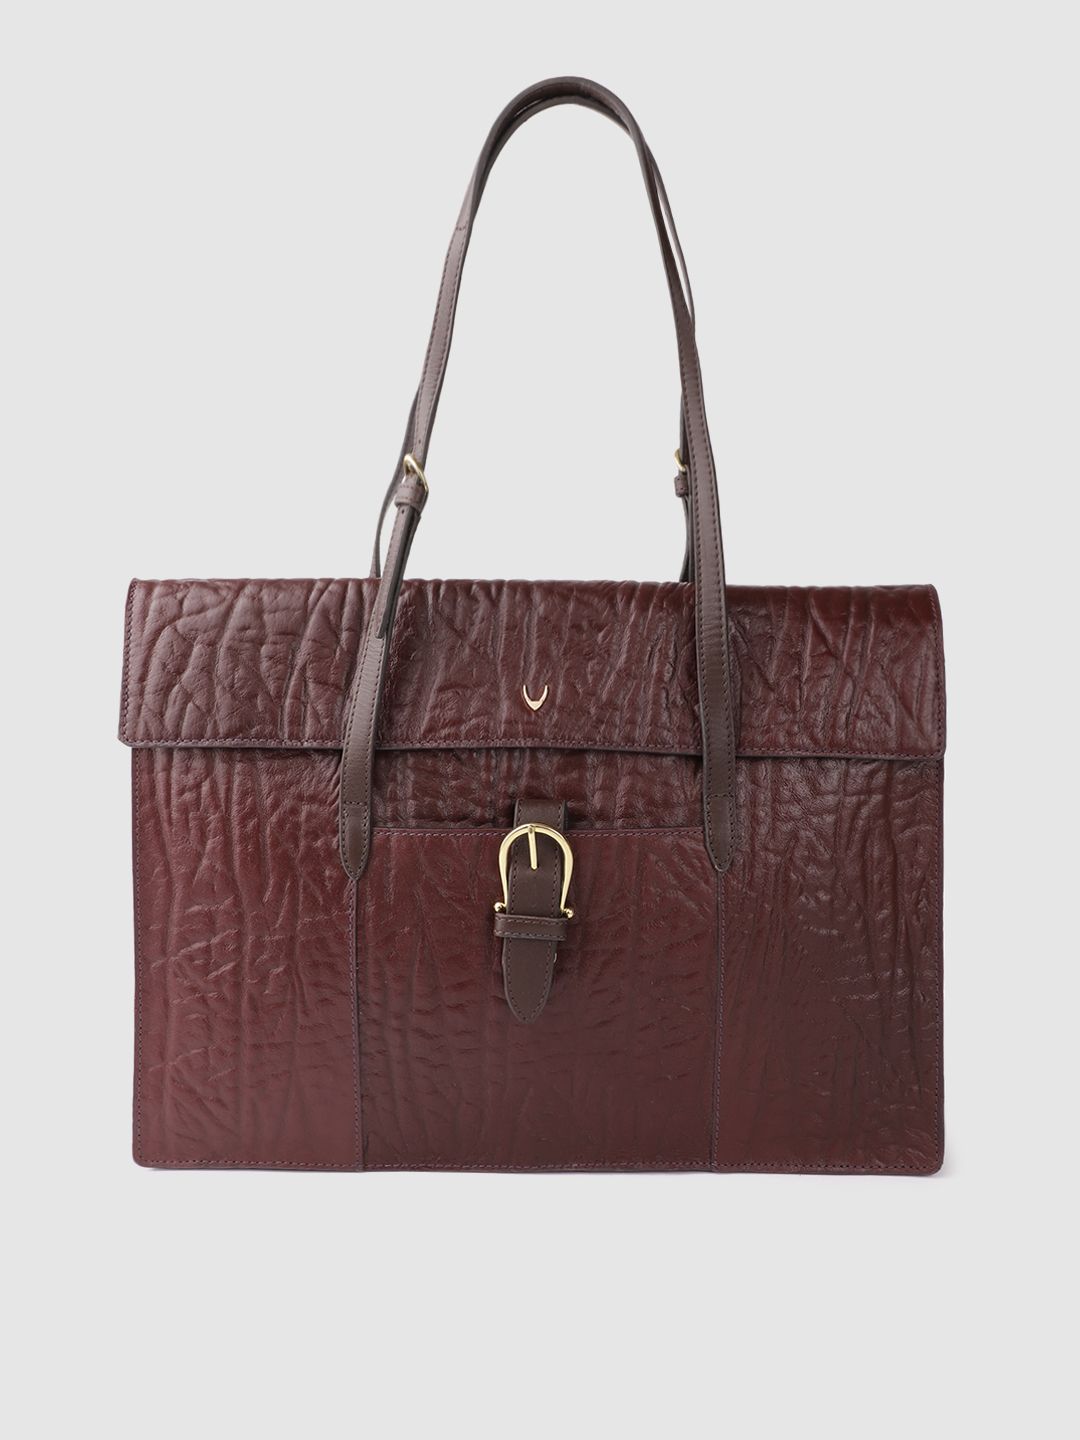 Hidesign Burgundy Croc Textured Leather Handcrafted Oversized Structured Shoulder Bag Price in India